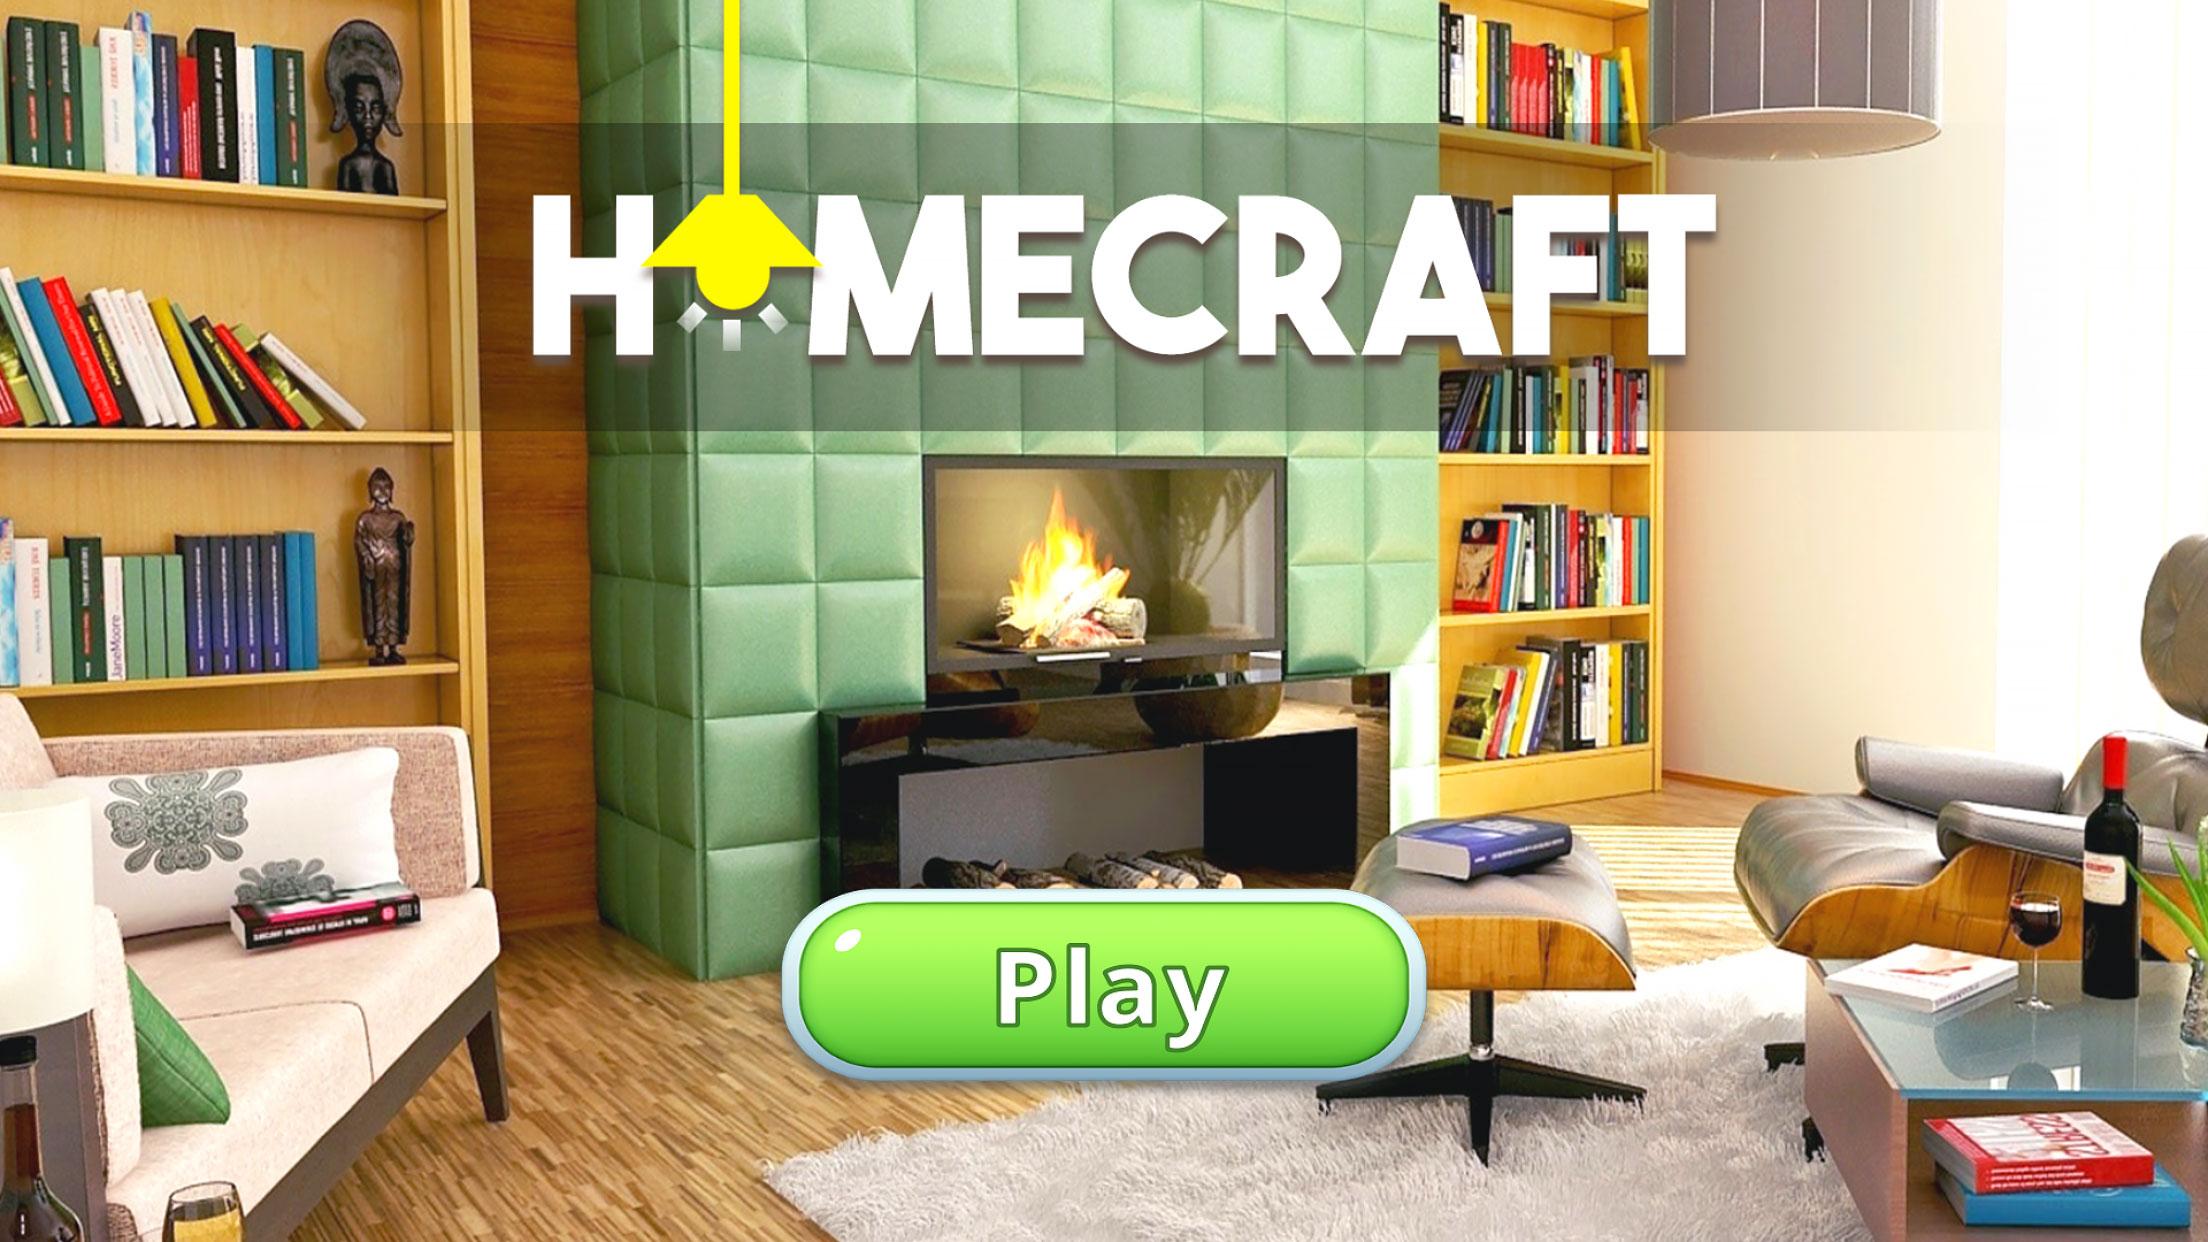 Homecraft - Home Design Game APK 1.6.2 Download for Android – Download